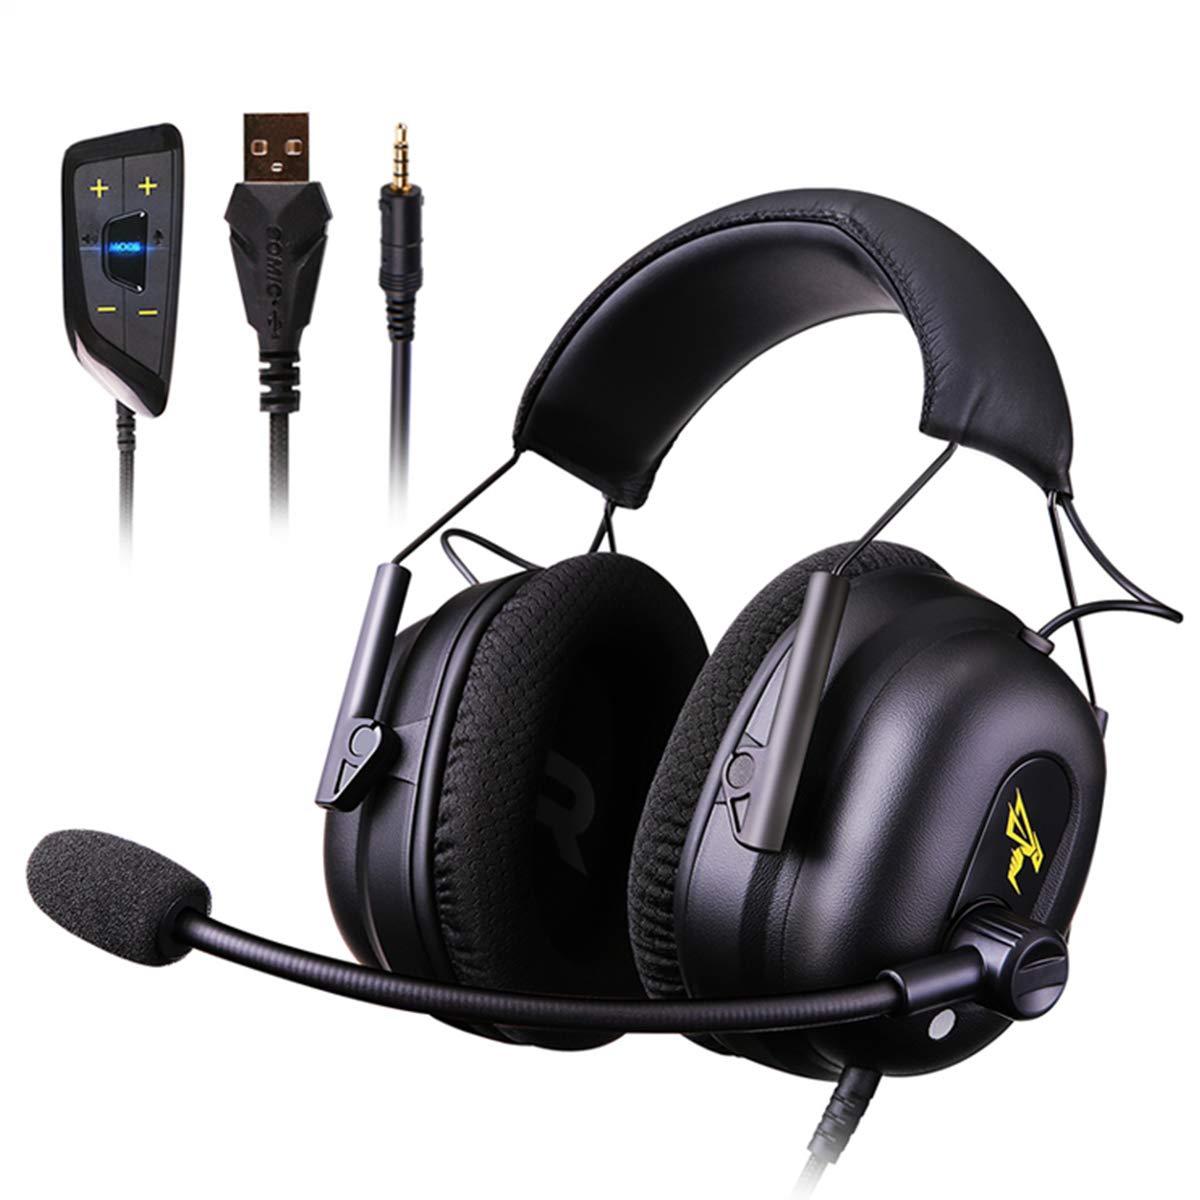 Over Ear Headphones 7.1 Surround Sound Gaming Headset Works with PC, PS4 PRO, Xbox S, Cell SOMIC Active Noise Canceling Mic HI-FI USB Jack Game Earphones -